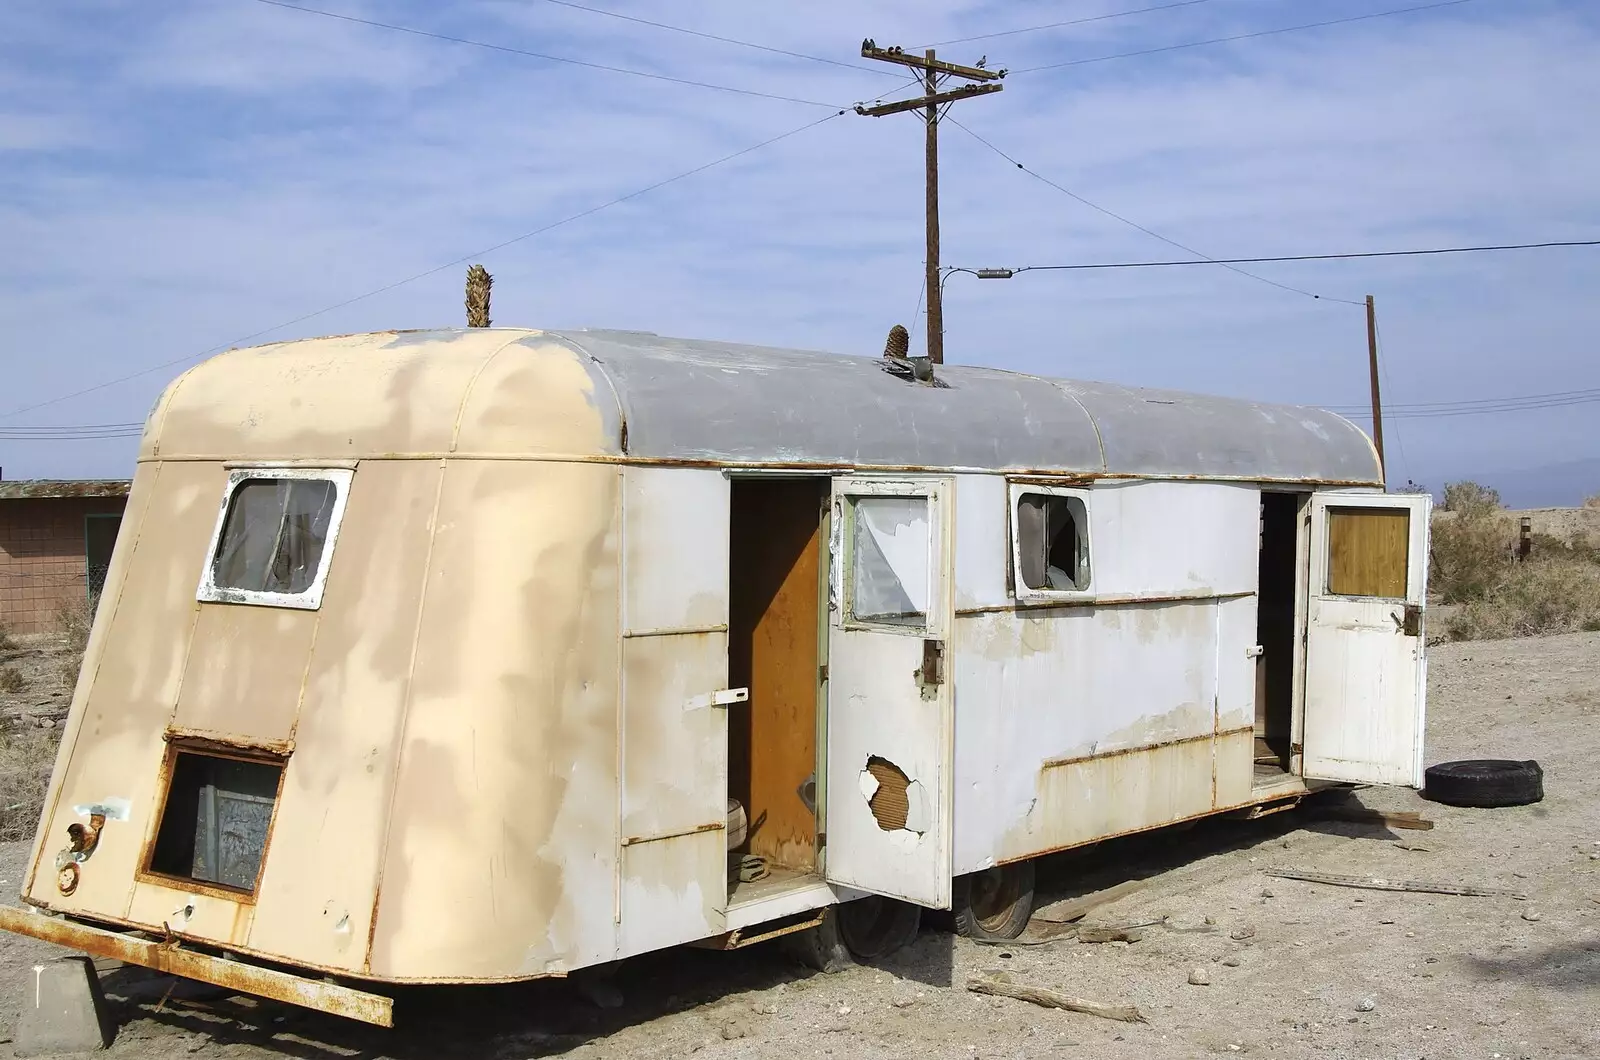 The remains of an airstream-like caravan, from The End of the World: Julian to the Salton Sea and Back, California, US - 1st March 2008